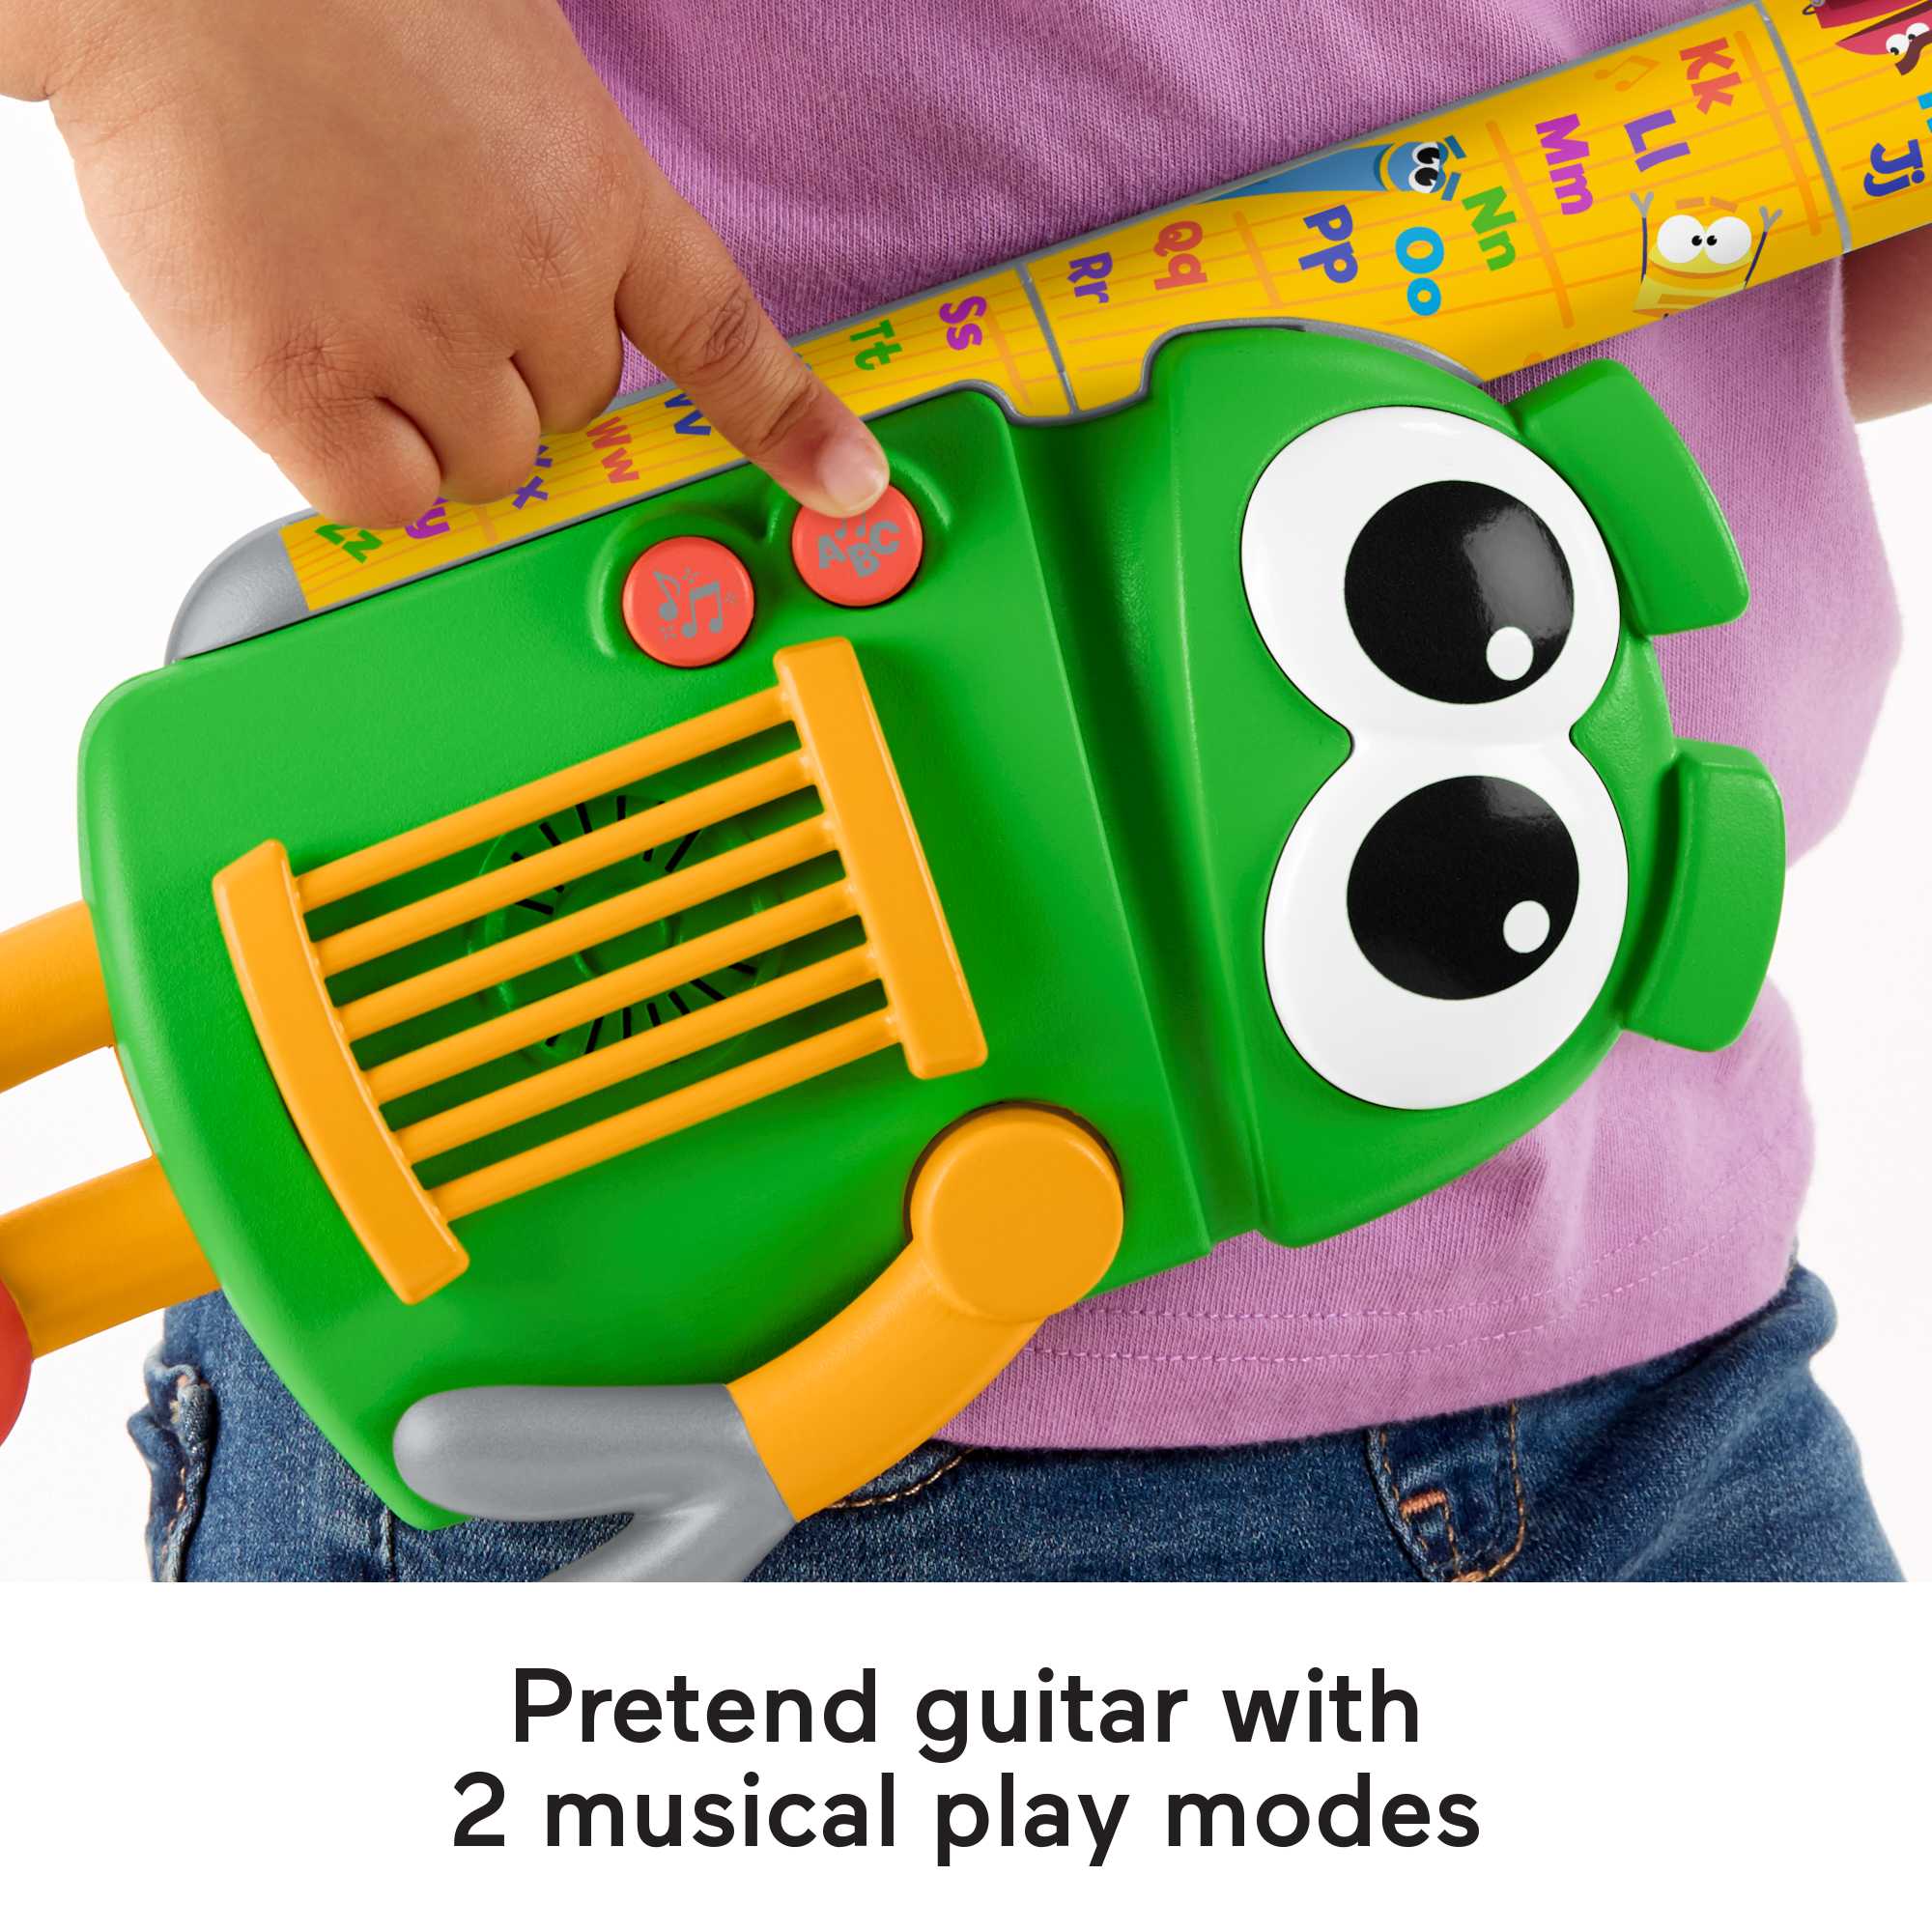 Fisher-Price StoryBots A to Z Rock Star Guitar Musical Learning Toy - image 4 of 7